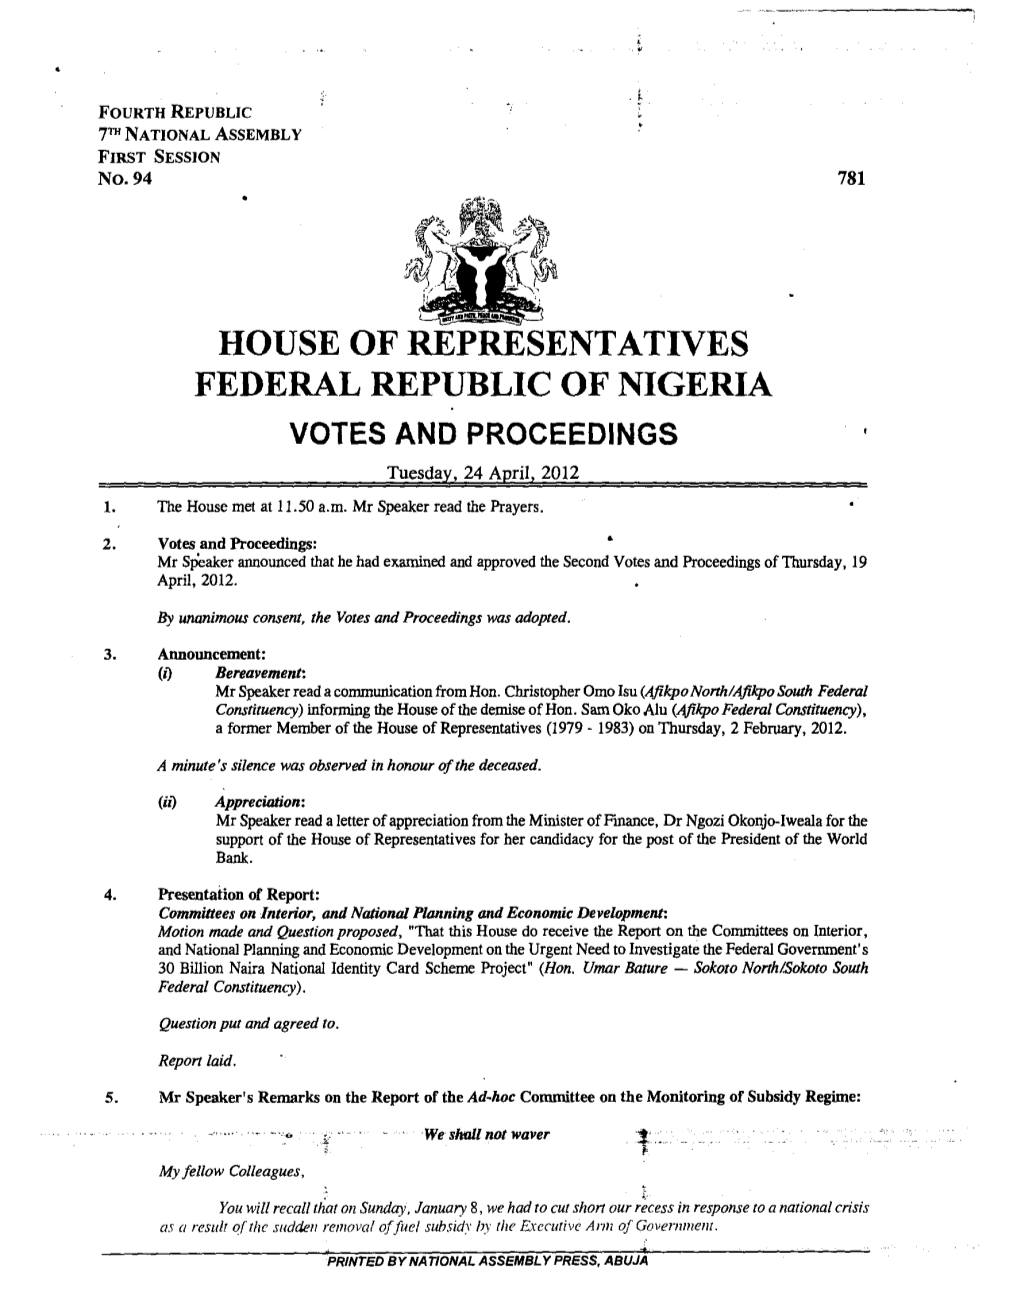 HOUSE of REPRESENTATIVES FEDERAL REPUBLIC of NIGERIA VOTES and PROCEEDINGS Tuesday, 24 April, 2012 1